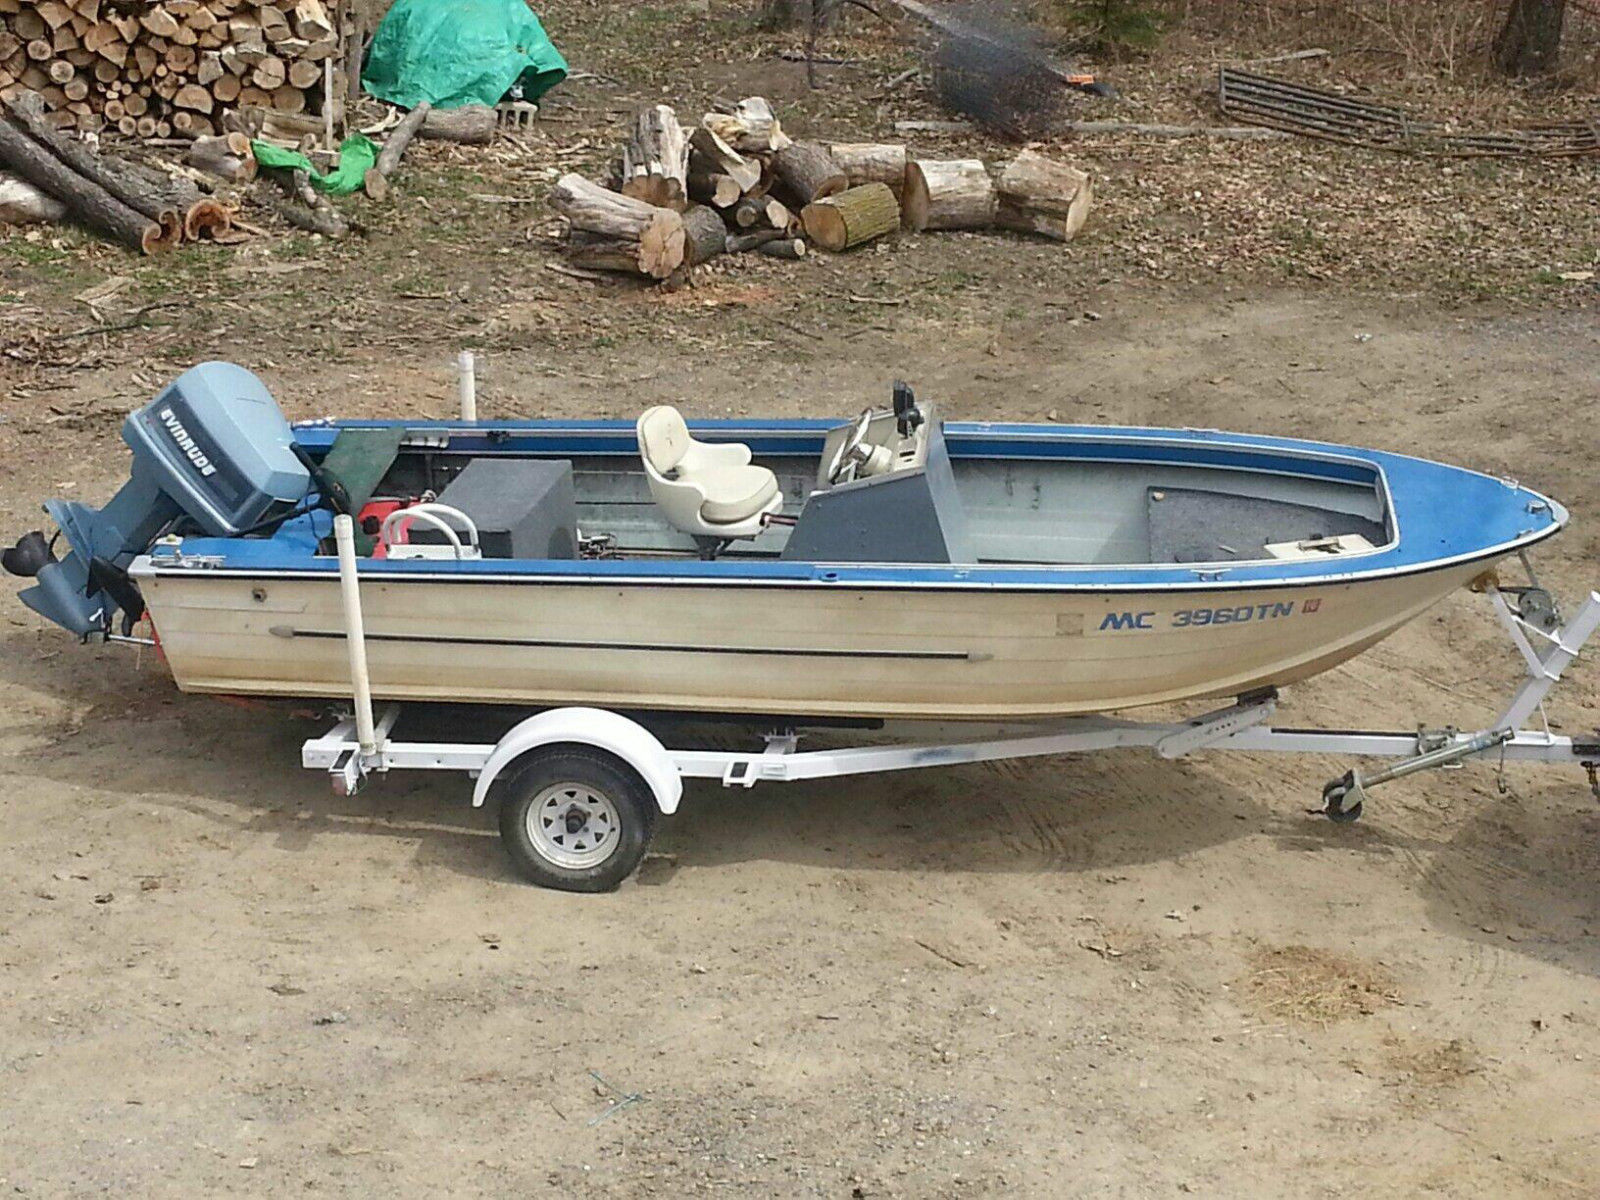 Starcraft Mariner 1974 for sale for $3,500 - Boats-from ...